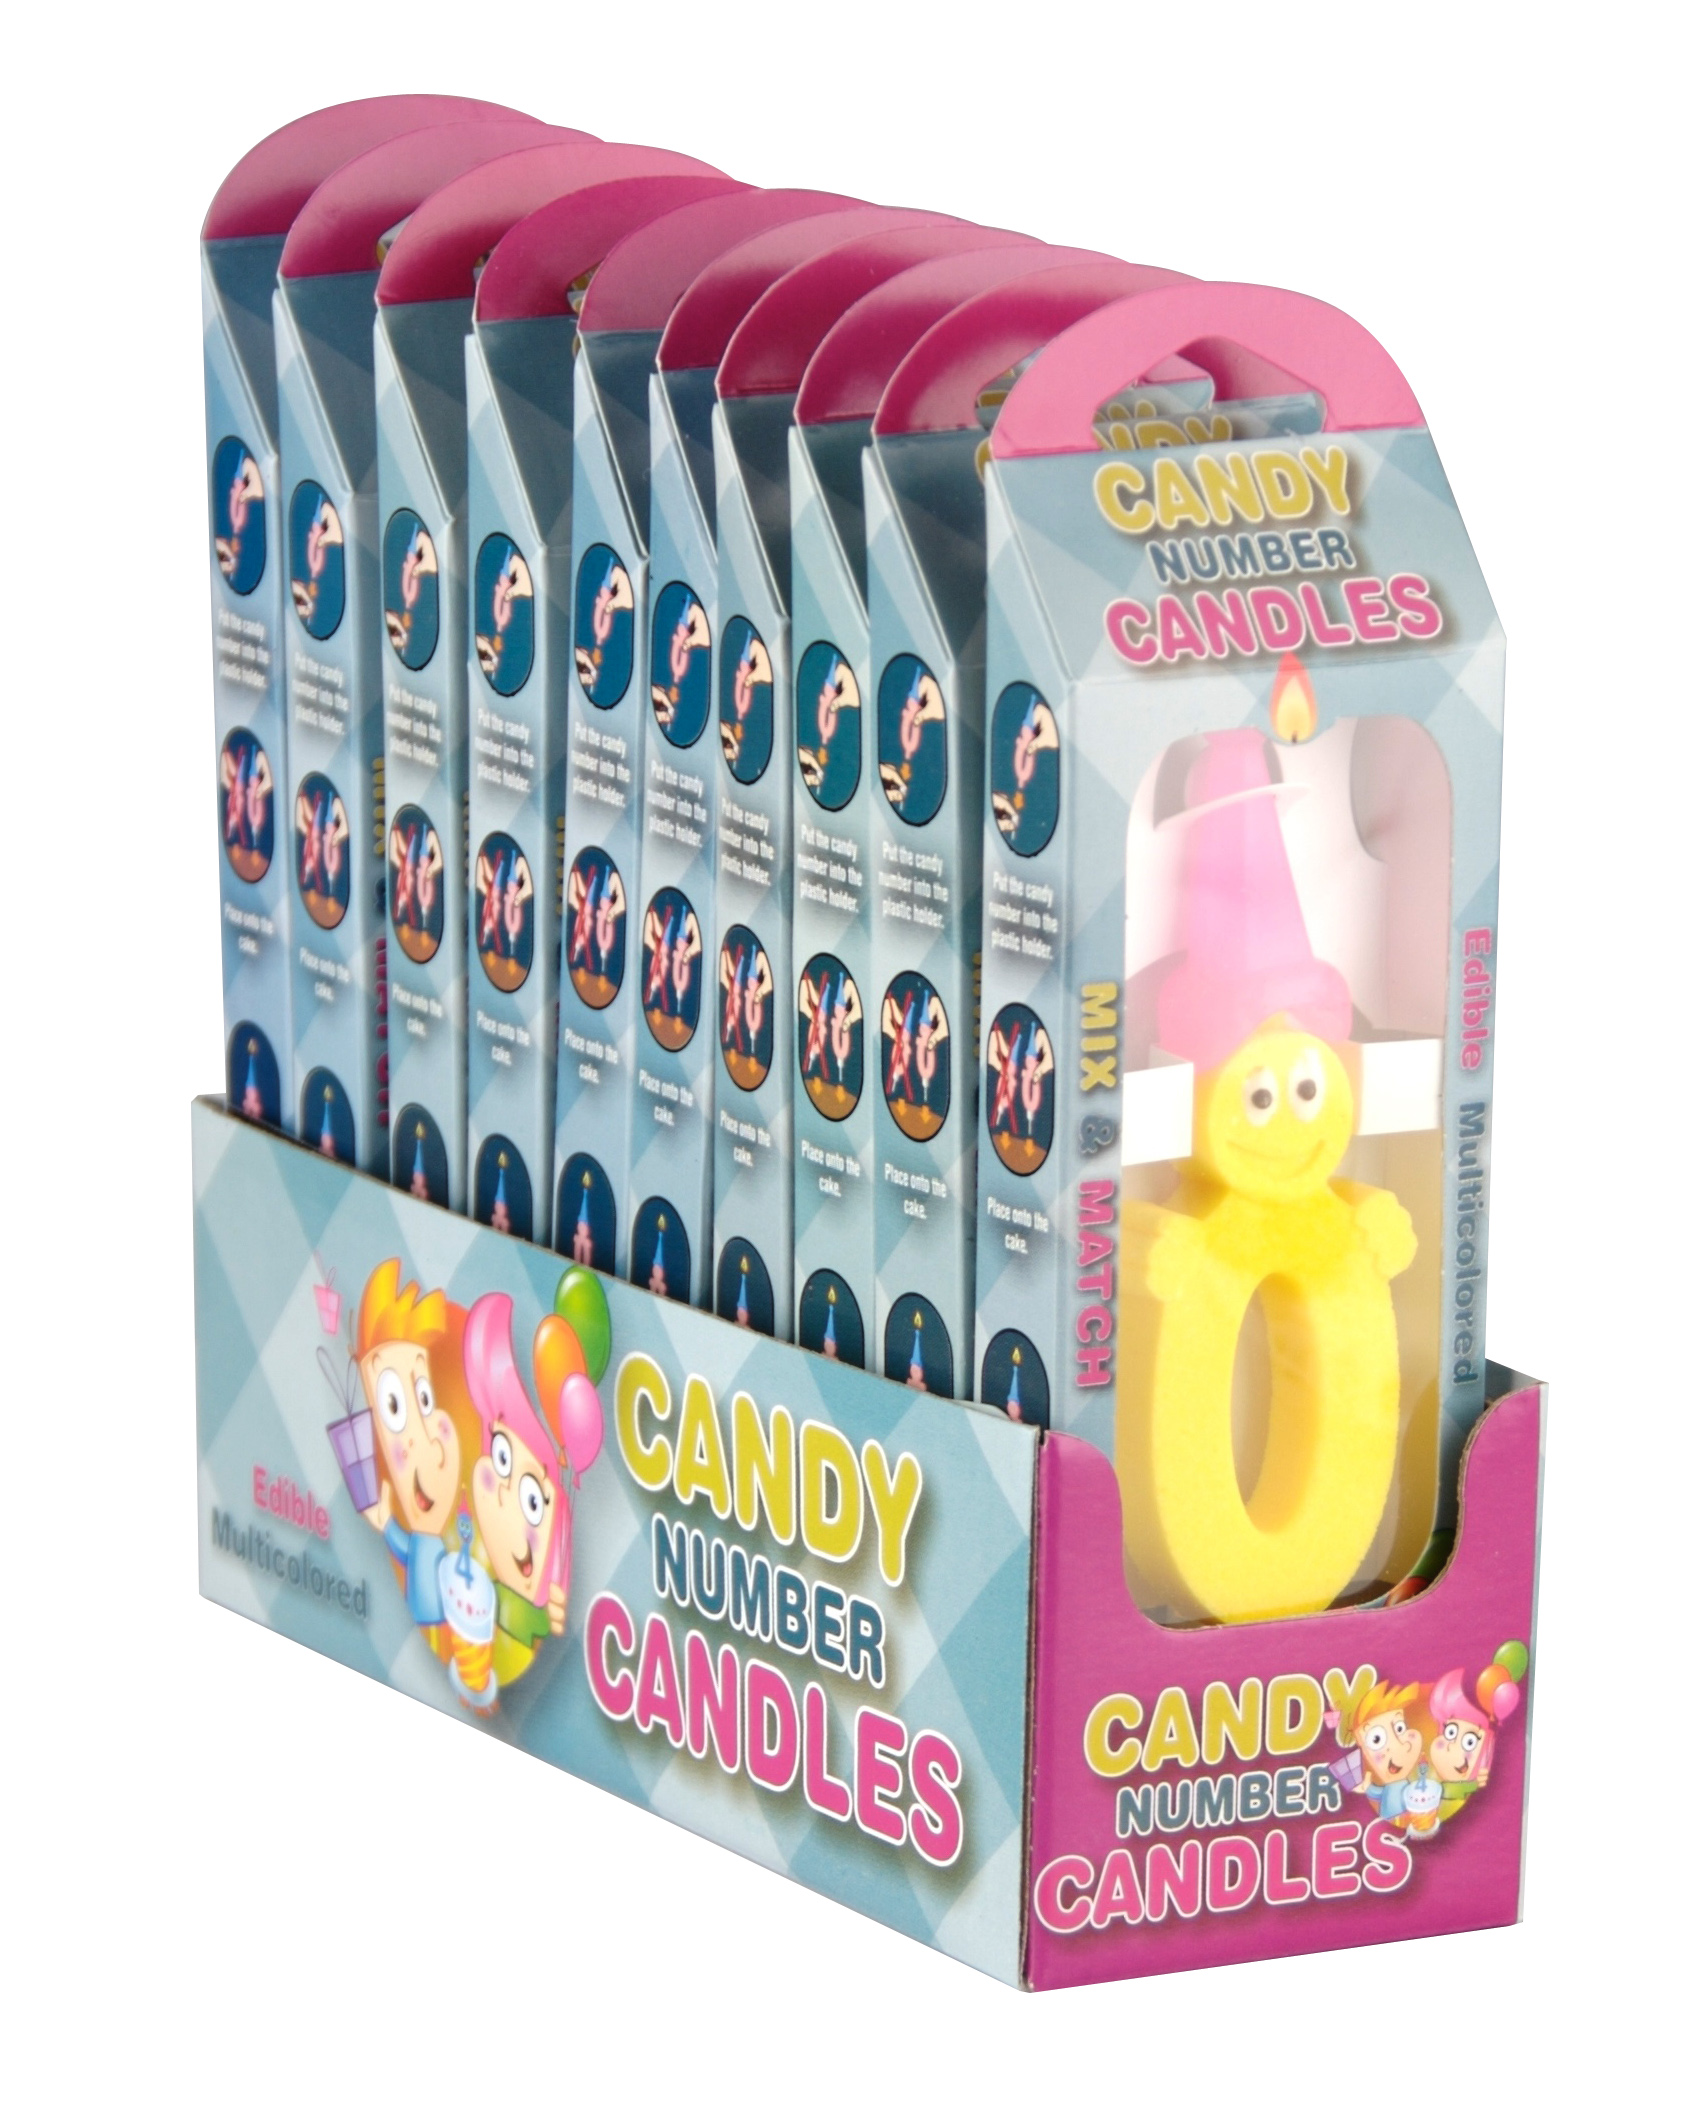 Candy Candles